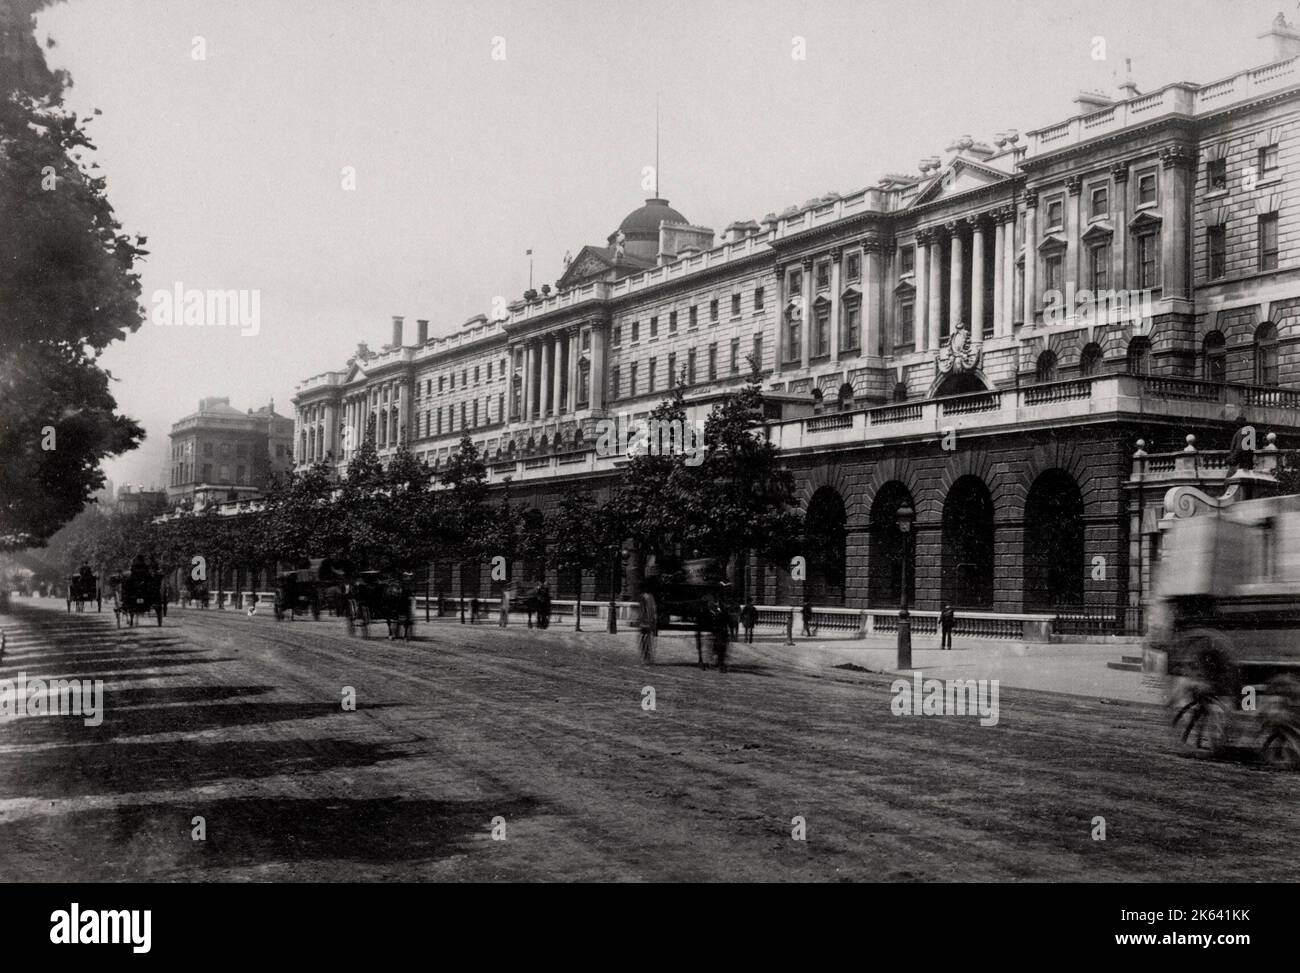 Photographie vintage du 19th siècle : Somerset House on the Embankment, Londres, Angleterre Banque D'Images